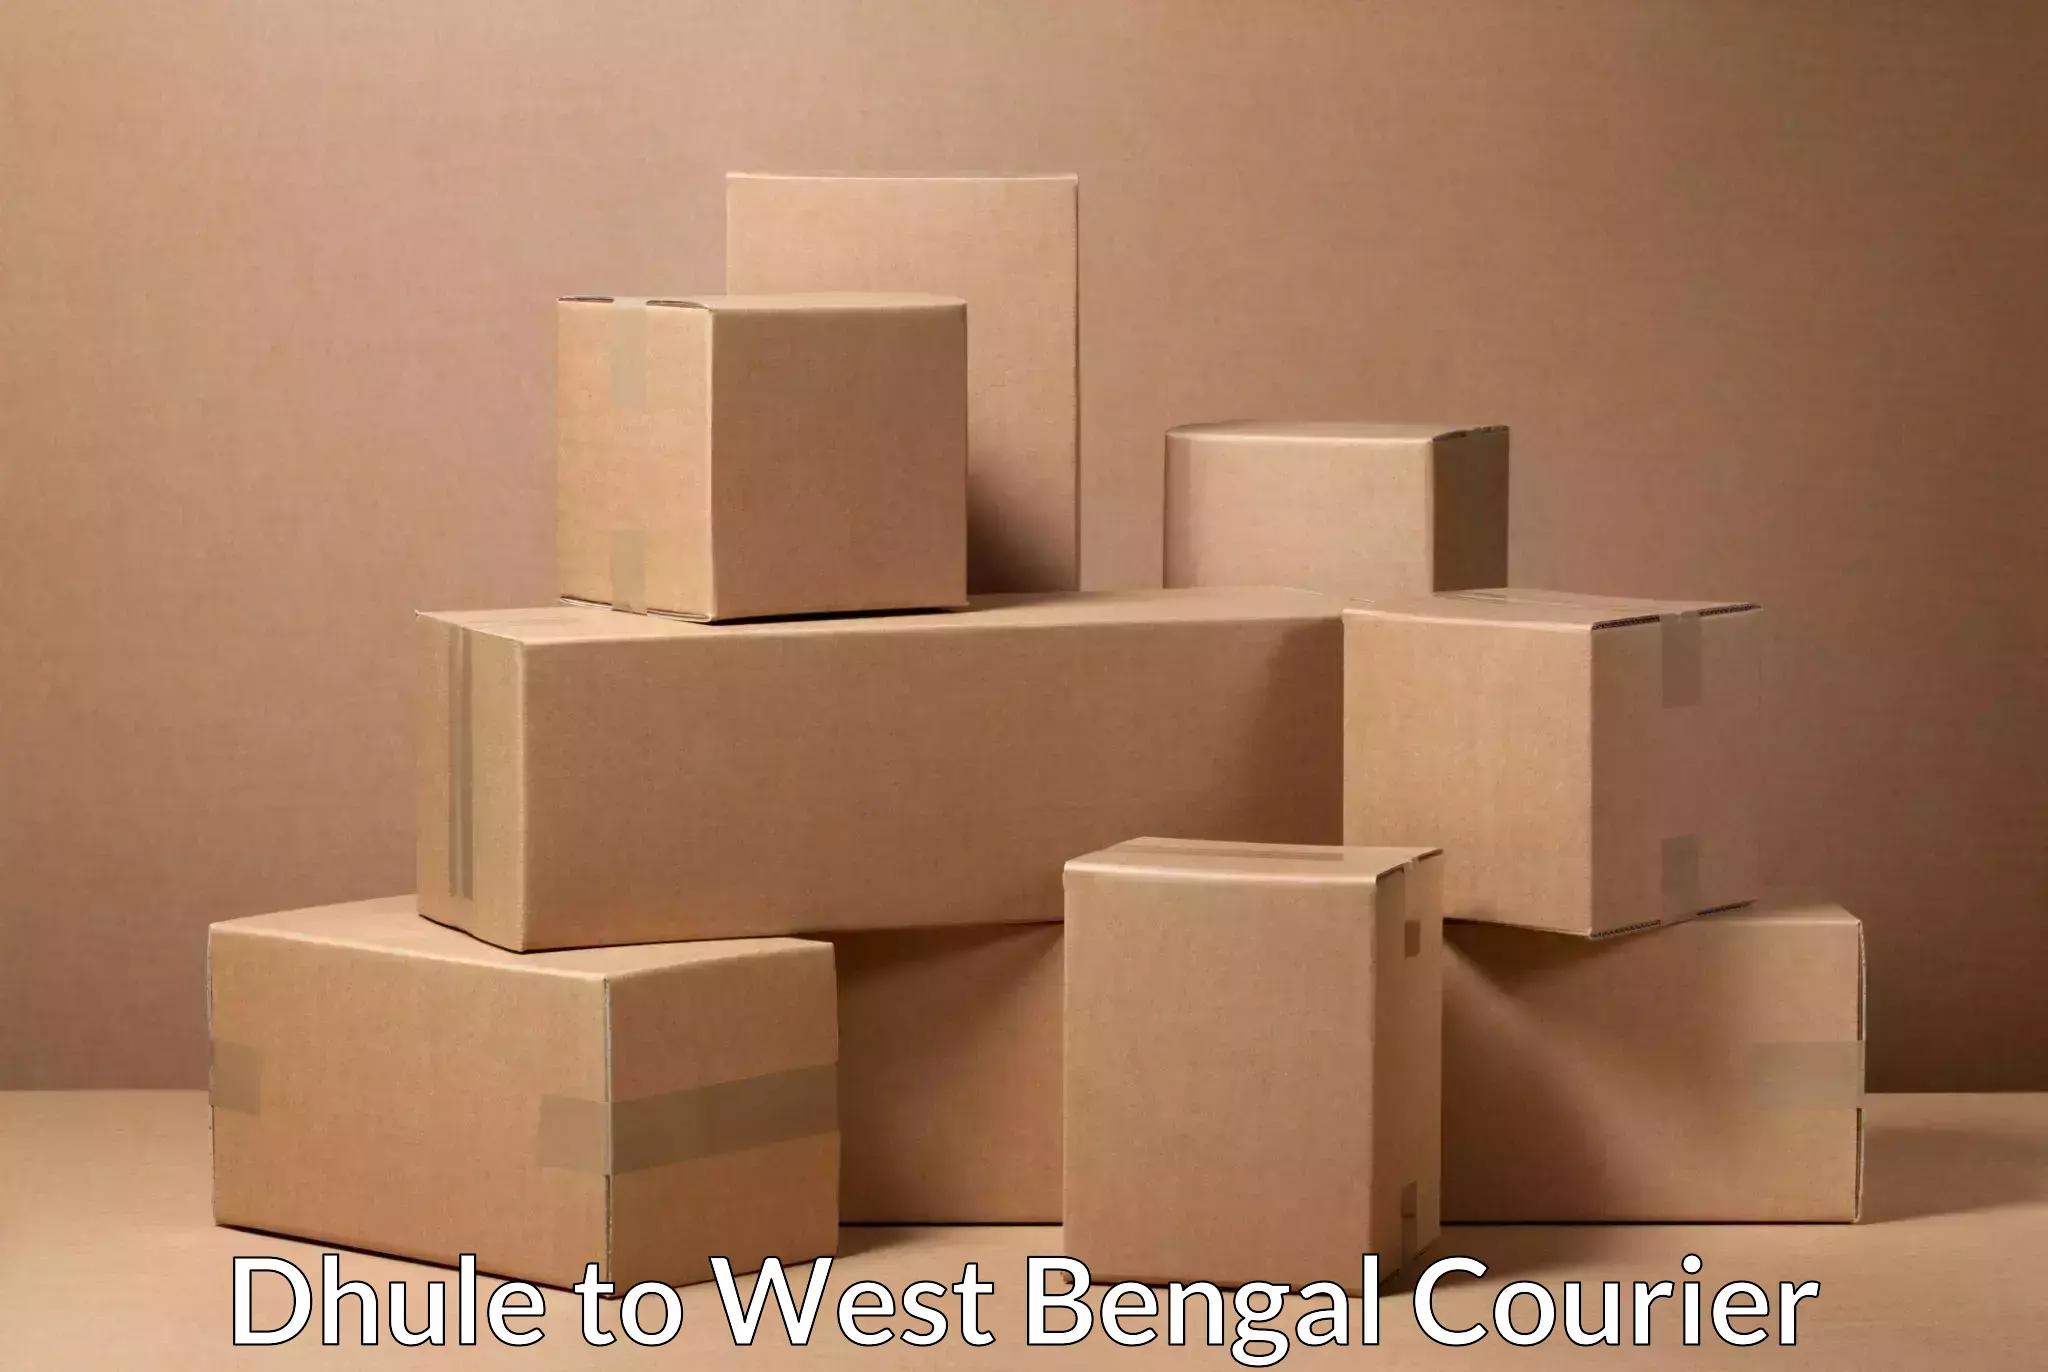 Residential courier service Dhule to Bankura